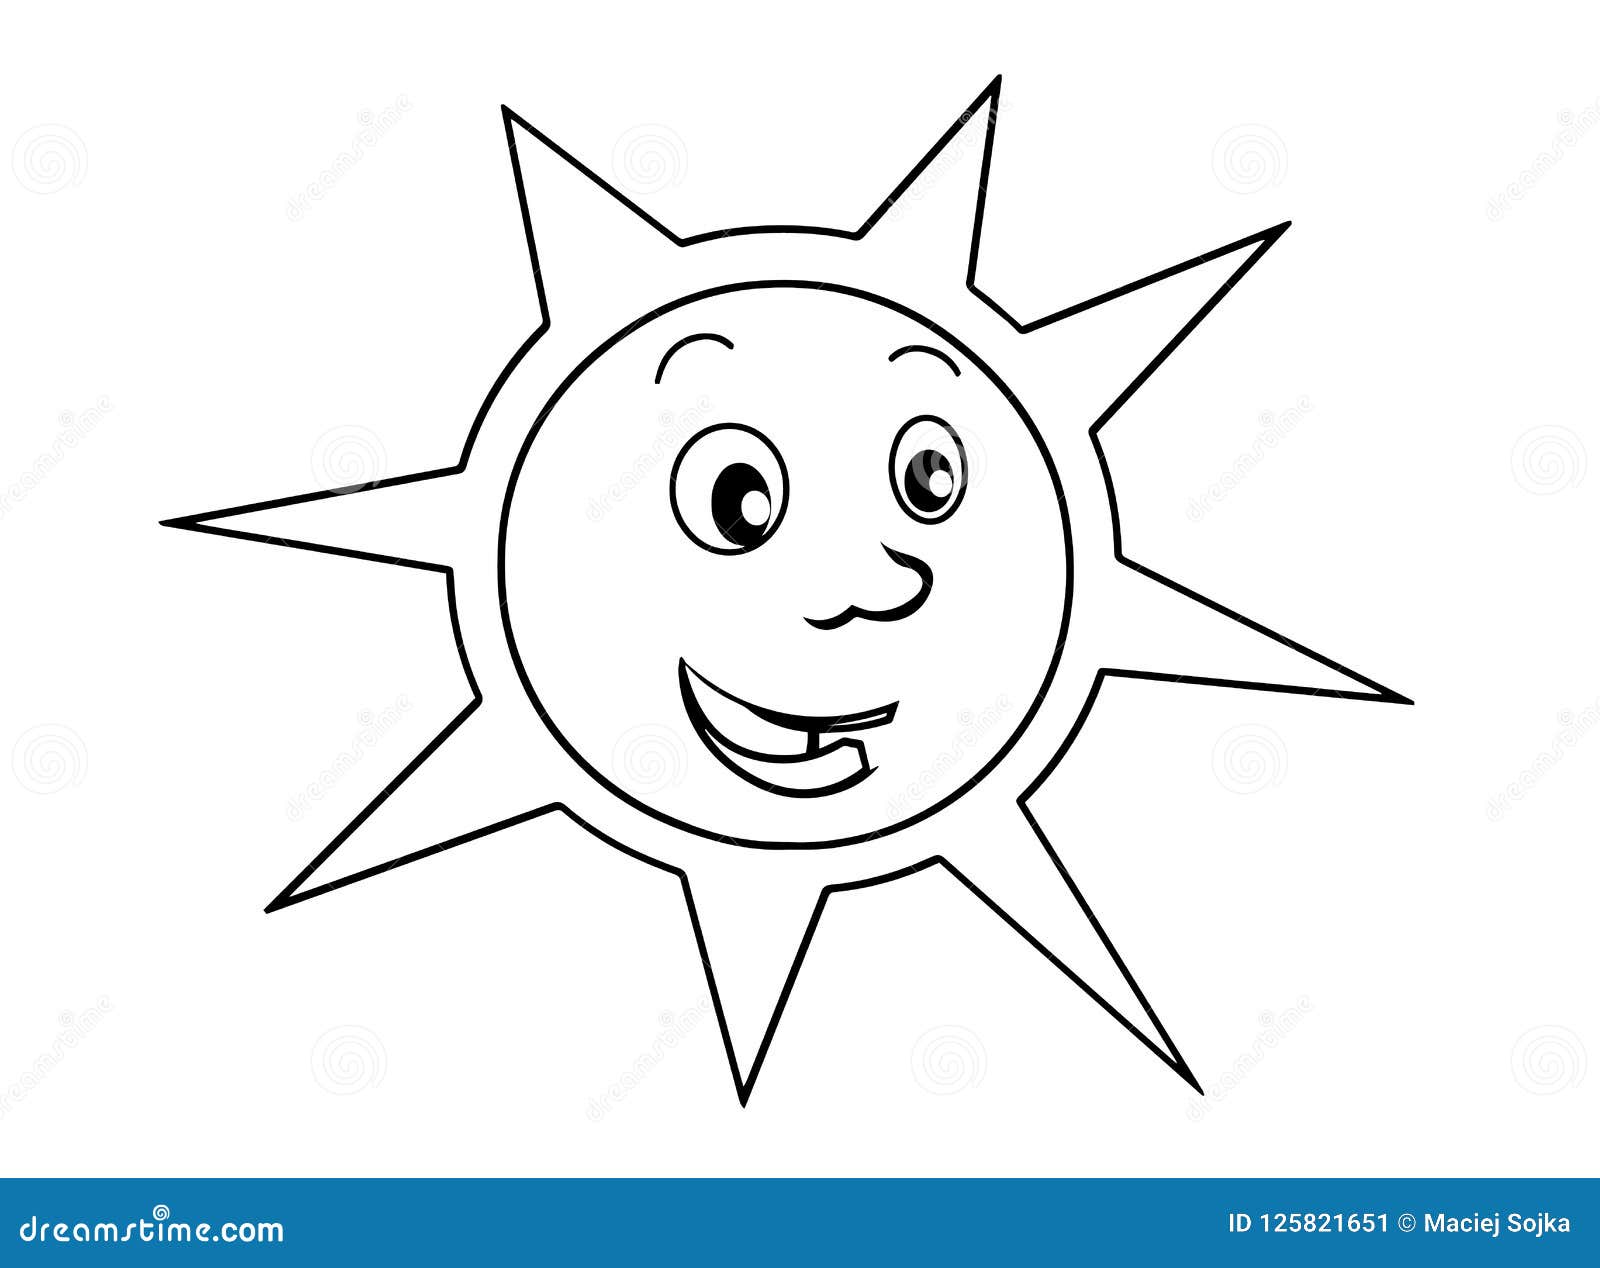 Download Cartoon Scene With Happy And Funny Sun - Coloring Page Stock Illustration - Illustration of cute ...